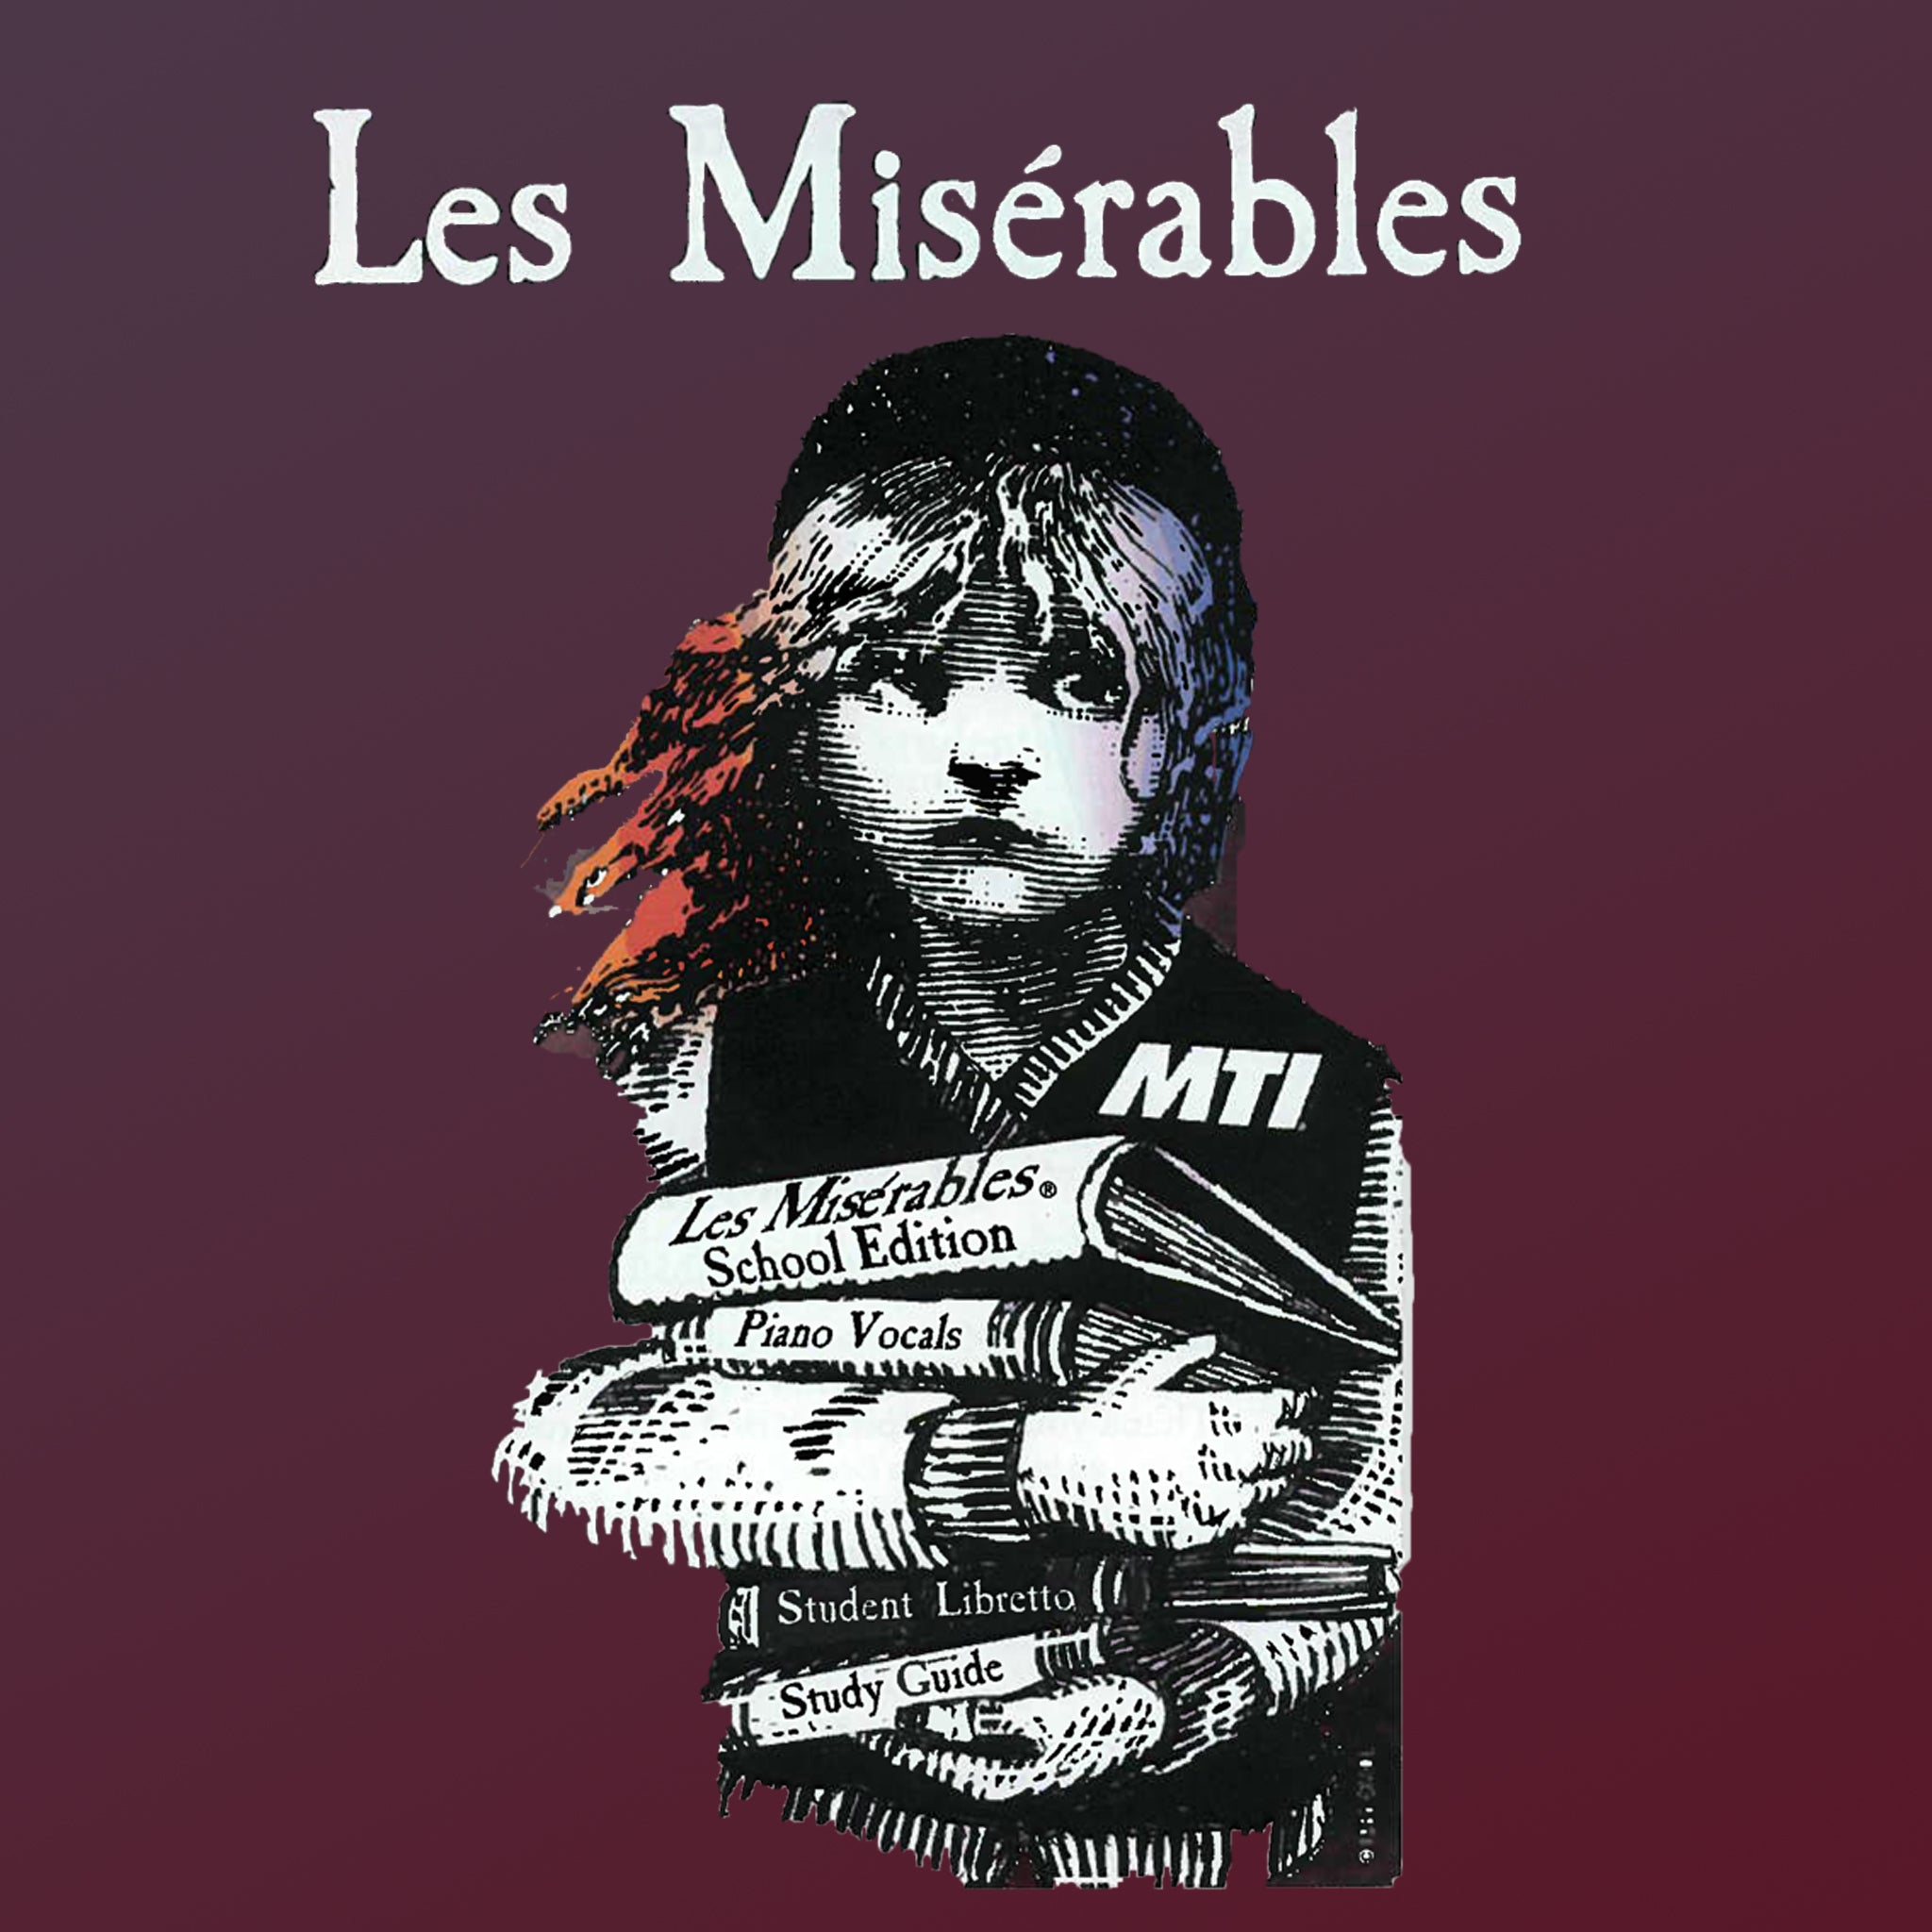 Les Misérables performed by Malvern Theater Society - Active Image Media